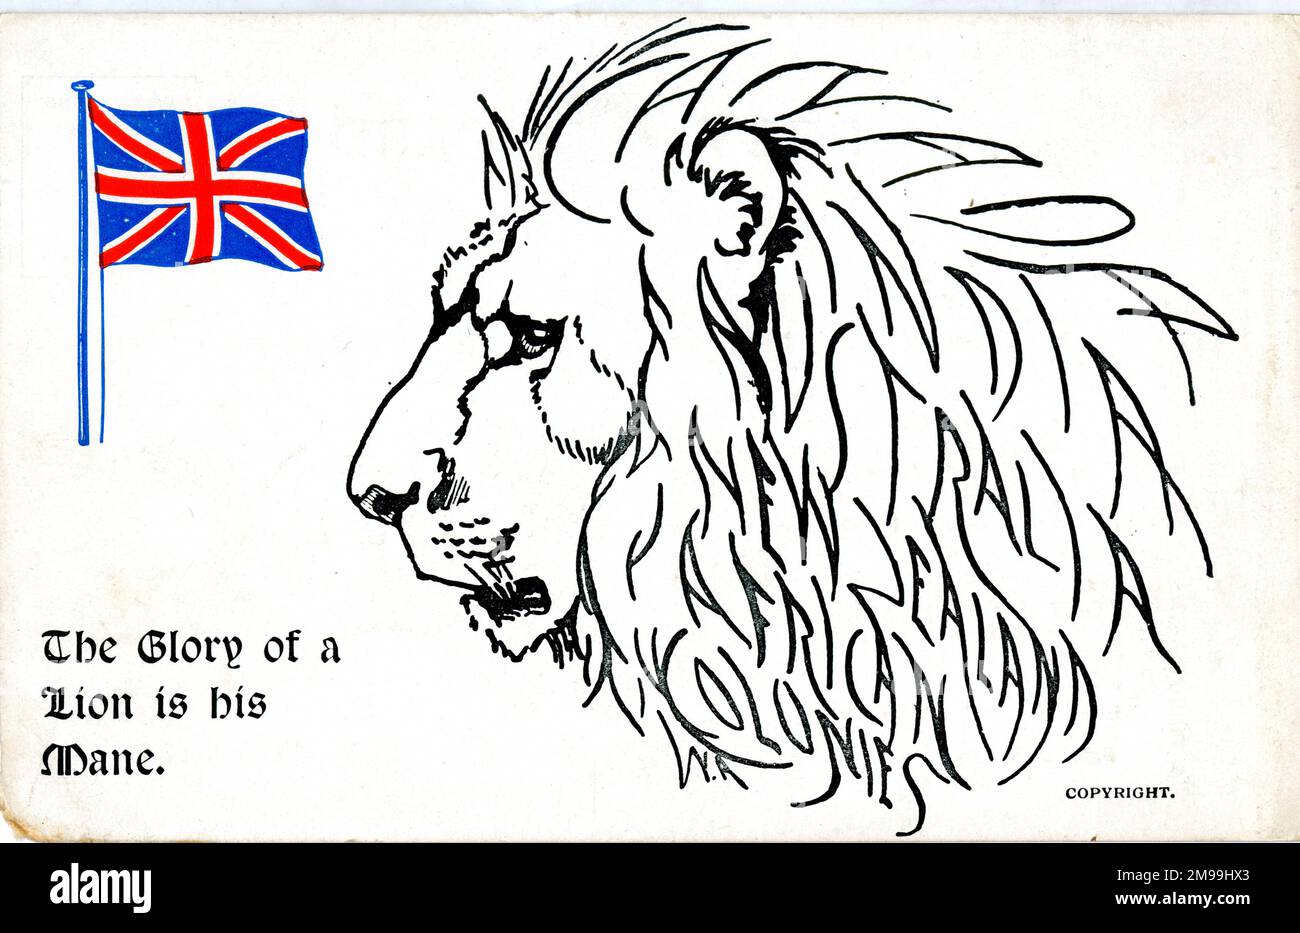 Novelty Patriotic Lion - The Glory of a Lion is his Mane. The names of British Empire colonies are hidden in the mane - Canada, India, Australia, New Zealand, African Colonies. Stock Photo